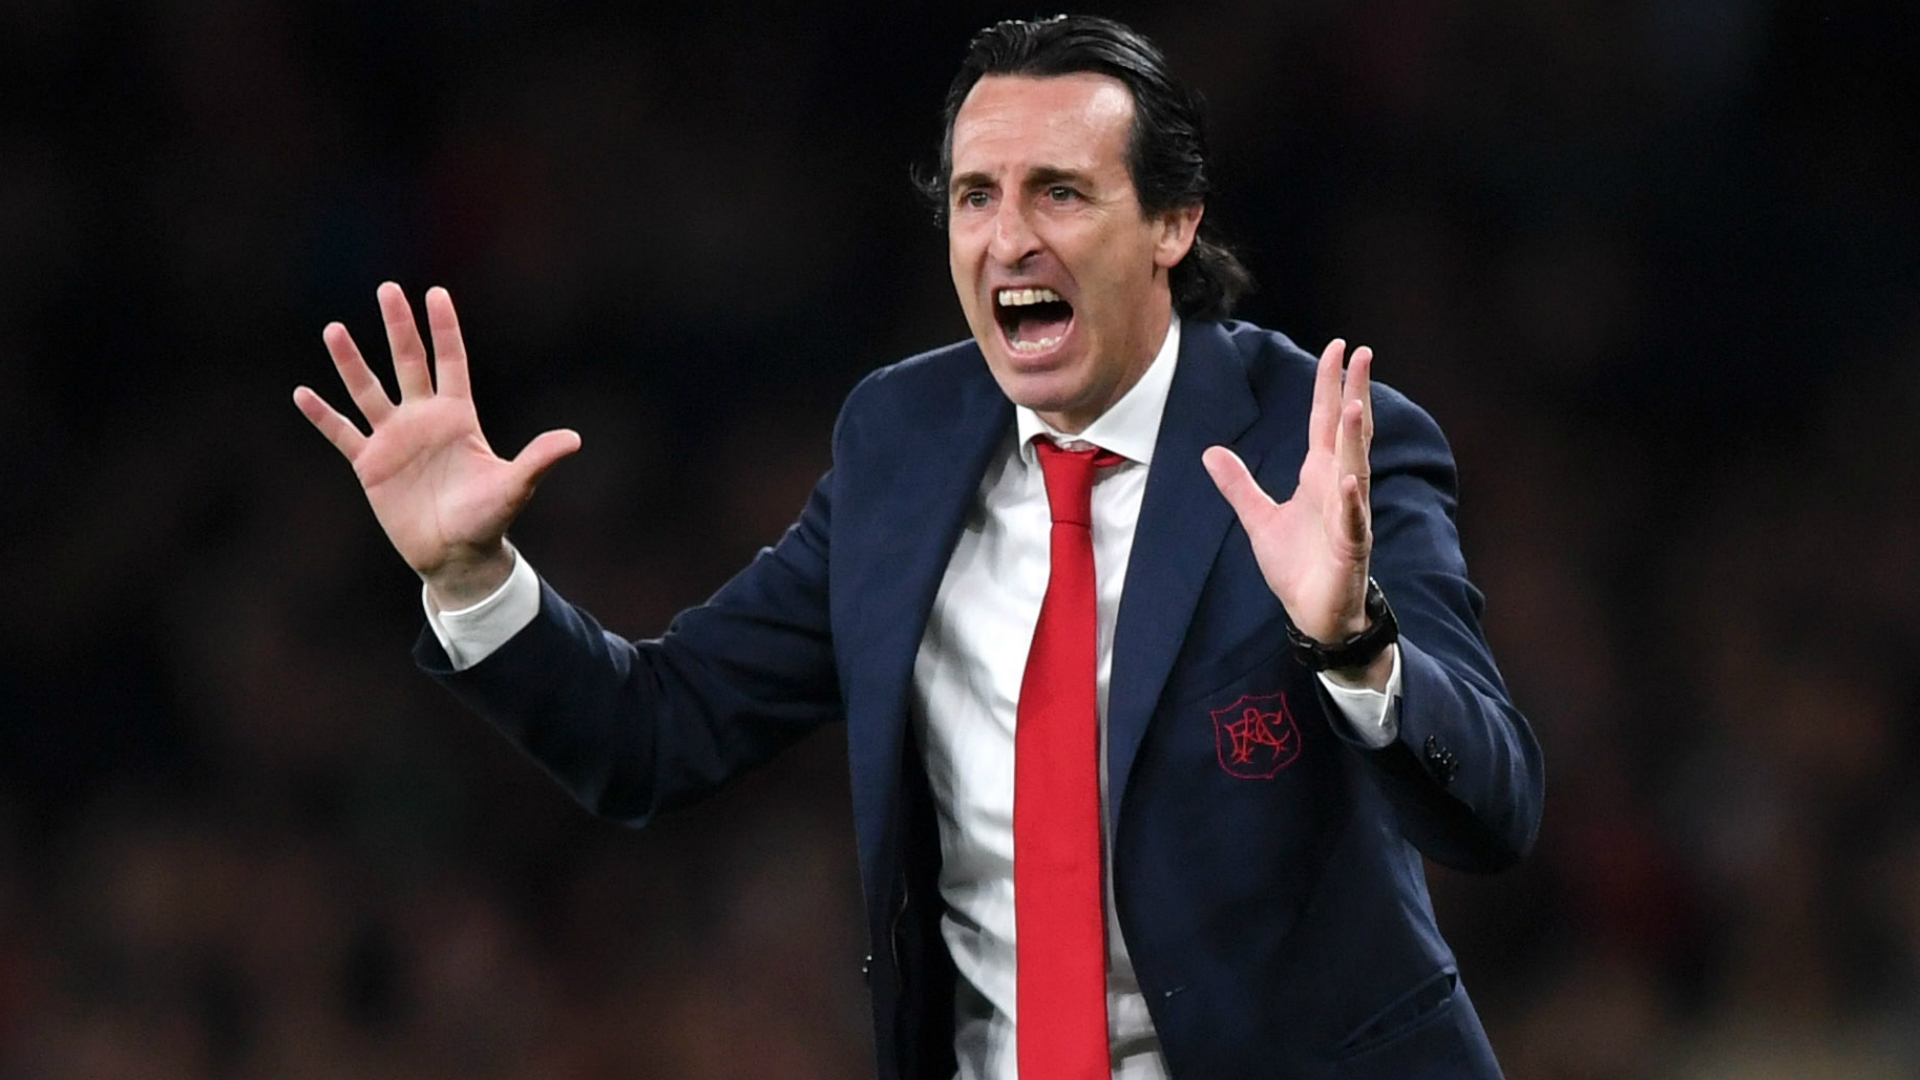 Arsenal reached the Europa League final thanks largely to Unai Emery convincing the players of the competition's worth.